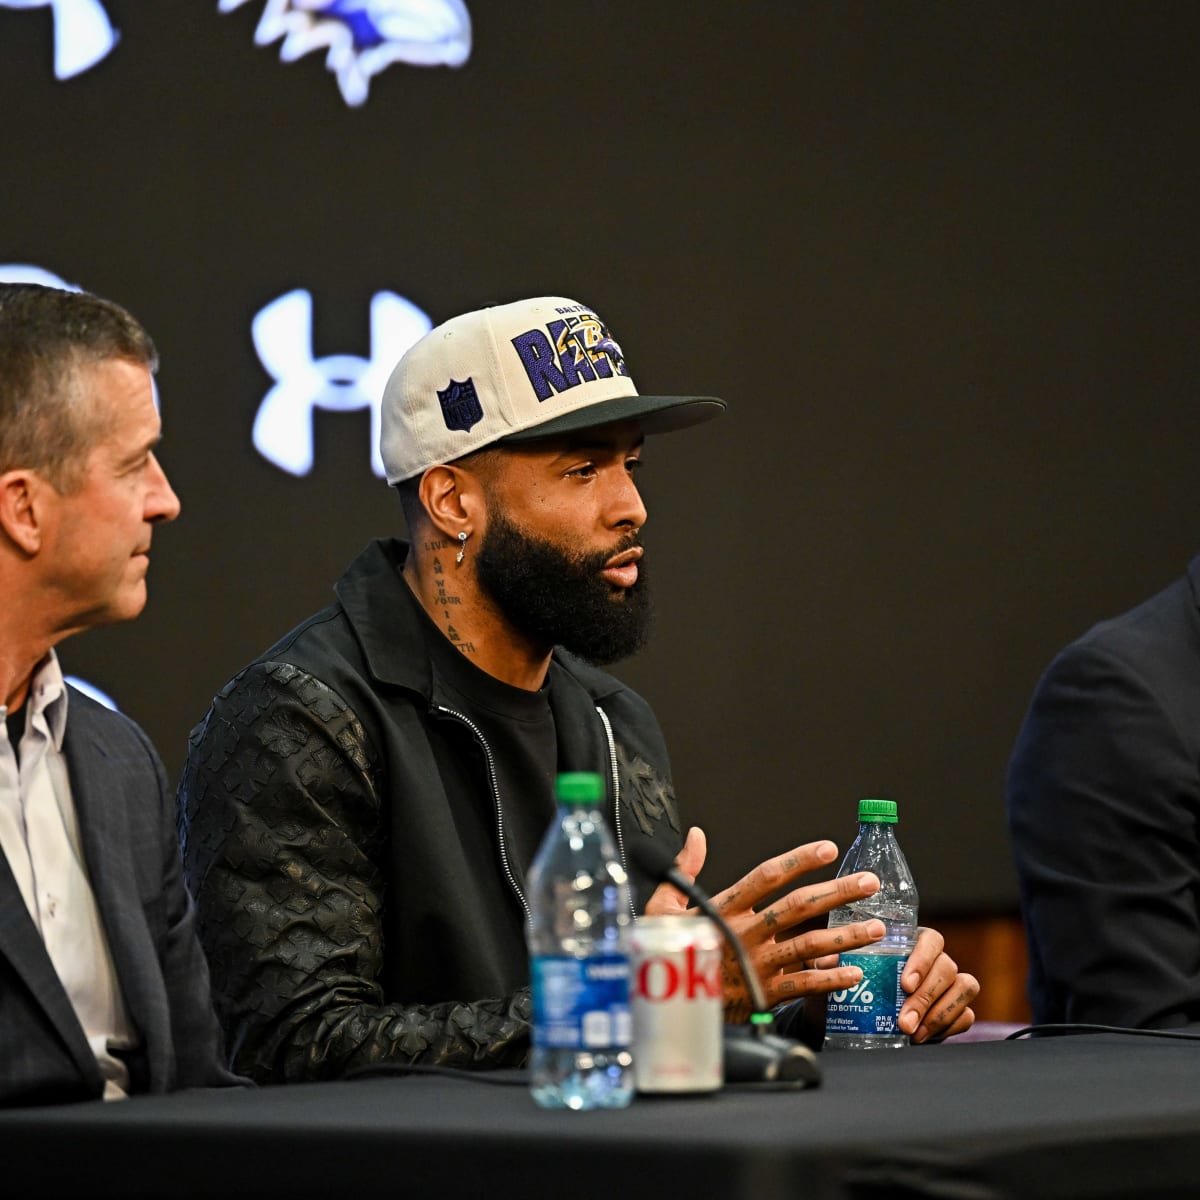 Odell Beckham Jr.'s injury woes continue as he takes mentorship role with  Ravens